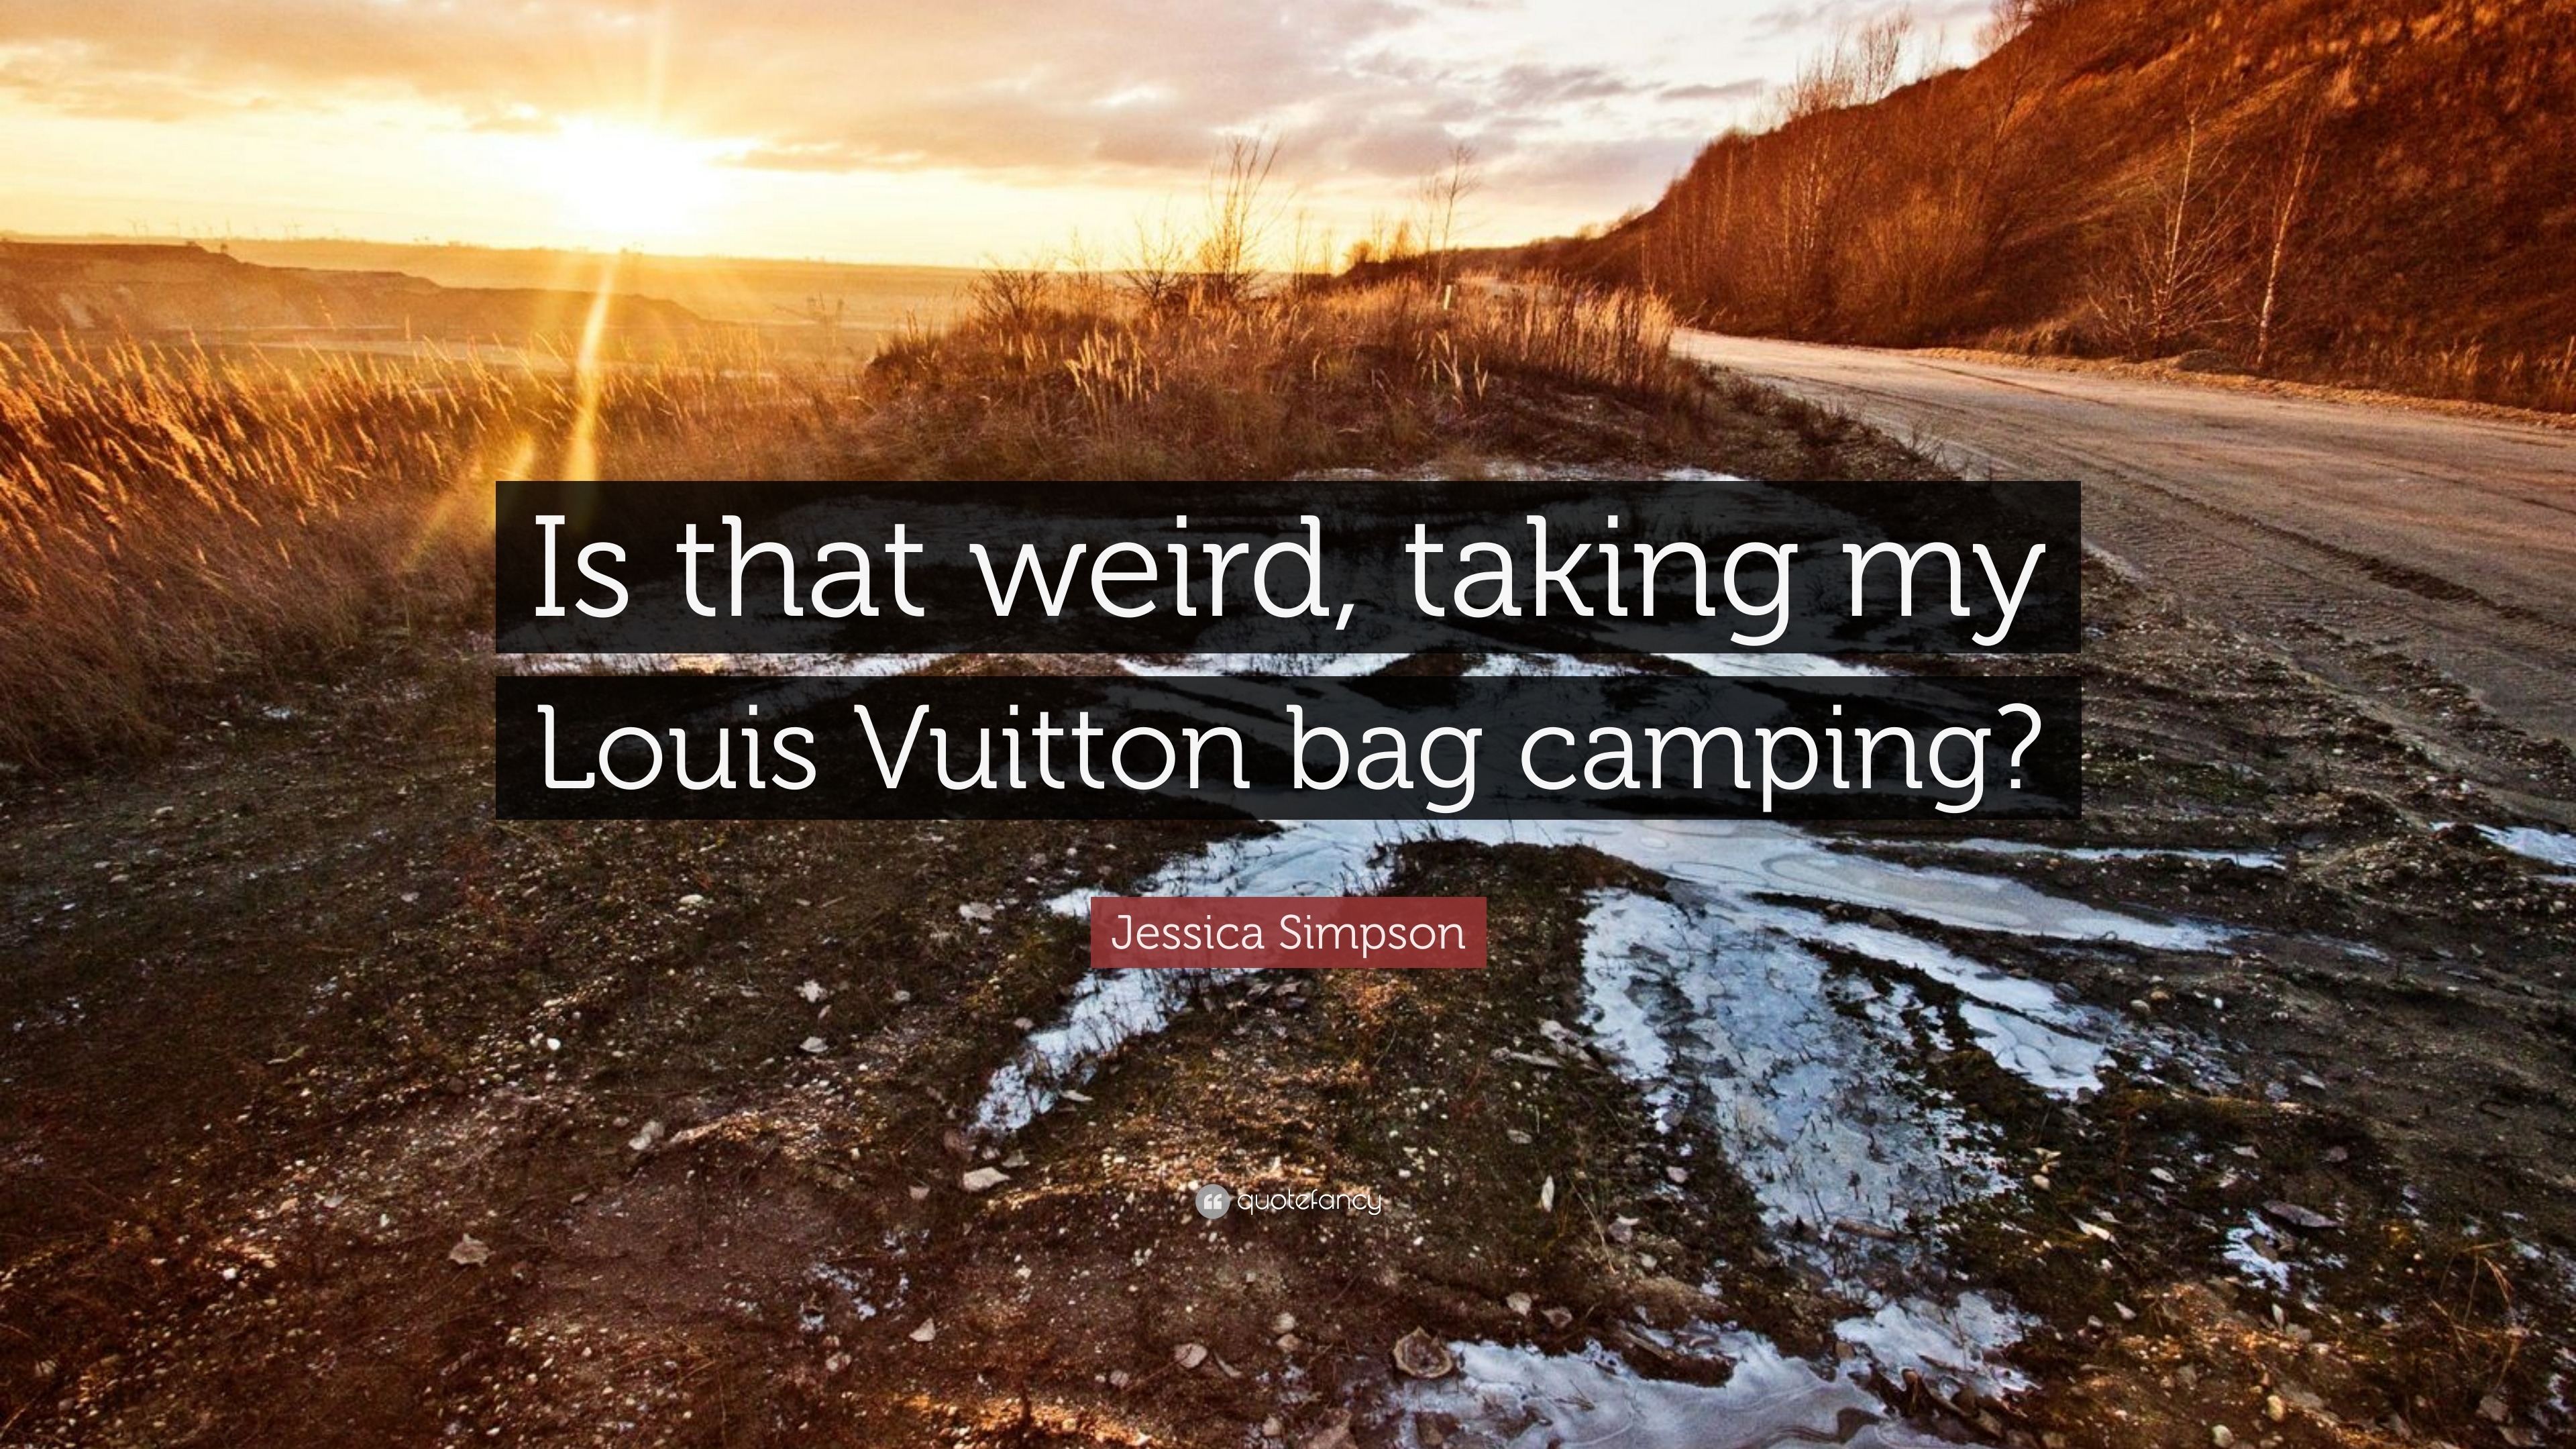 Jessica Simpson quote: Is that weird, taking my Louis Vuitton bag camping?